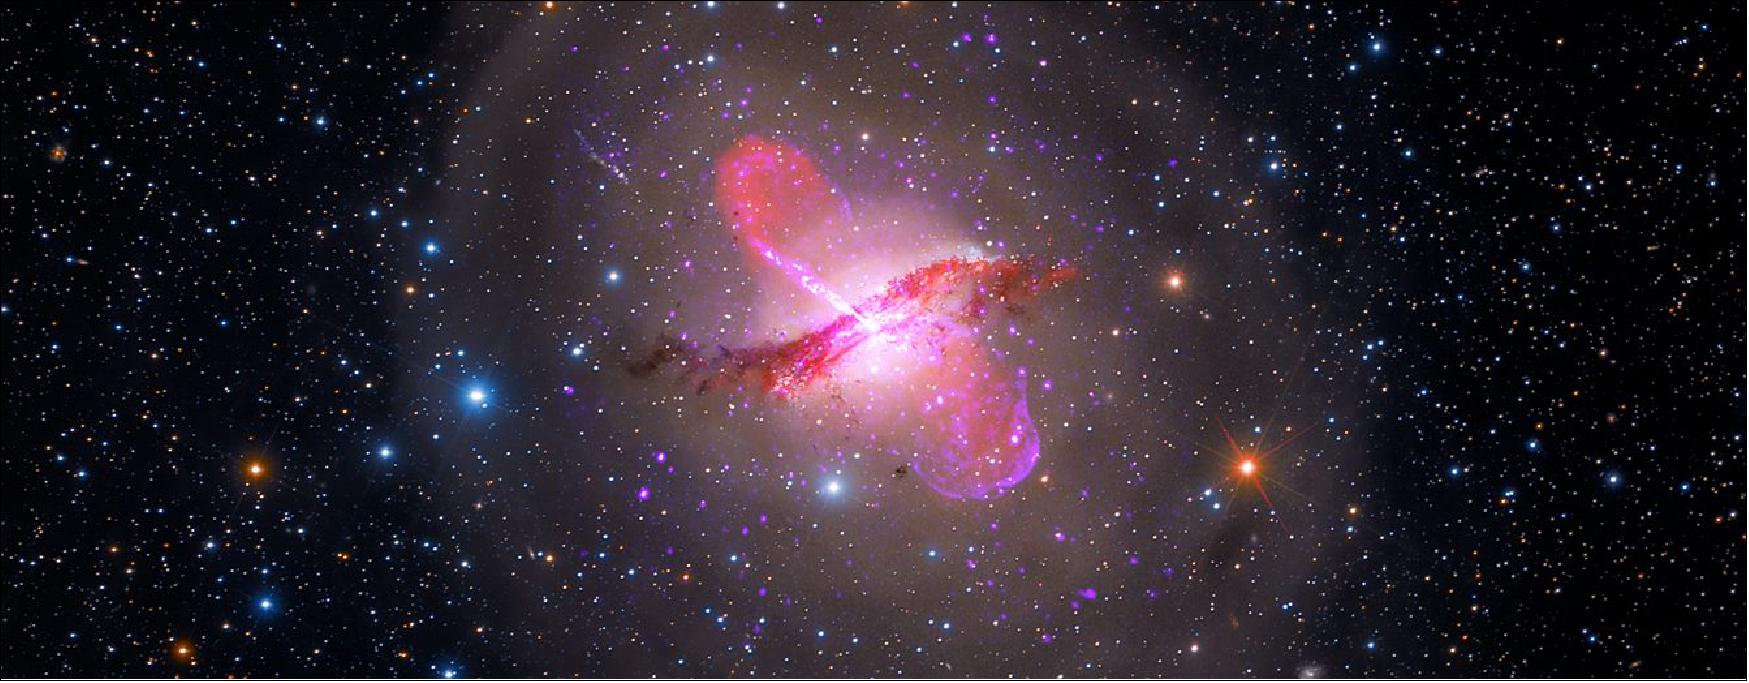 Figure 18: Centaurus A sports a warped central disk of gas and dust, which is evidence of a past collision and merger with another galaxy. It also has an active galactic nucleus that periodically emits jets. It is the fifth brightest galaxy in the sky and only about 13 million light-years away from Earth, making it an ideal target to study an active galactic nucleus – a supermassive black hole emitting jets and winds – with NASA's upcoming James Webb Space Telescope [image credit: X-ray: NASA/CXC/SAO; Optical: Rolf Olsen; Infrared: NASA /JPL-Caltech; Radio: NRAO/AUI/NSF/Univ.Hertfordshire/M.Hardcastle]